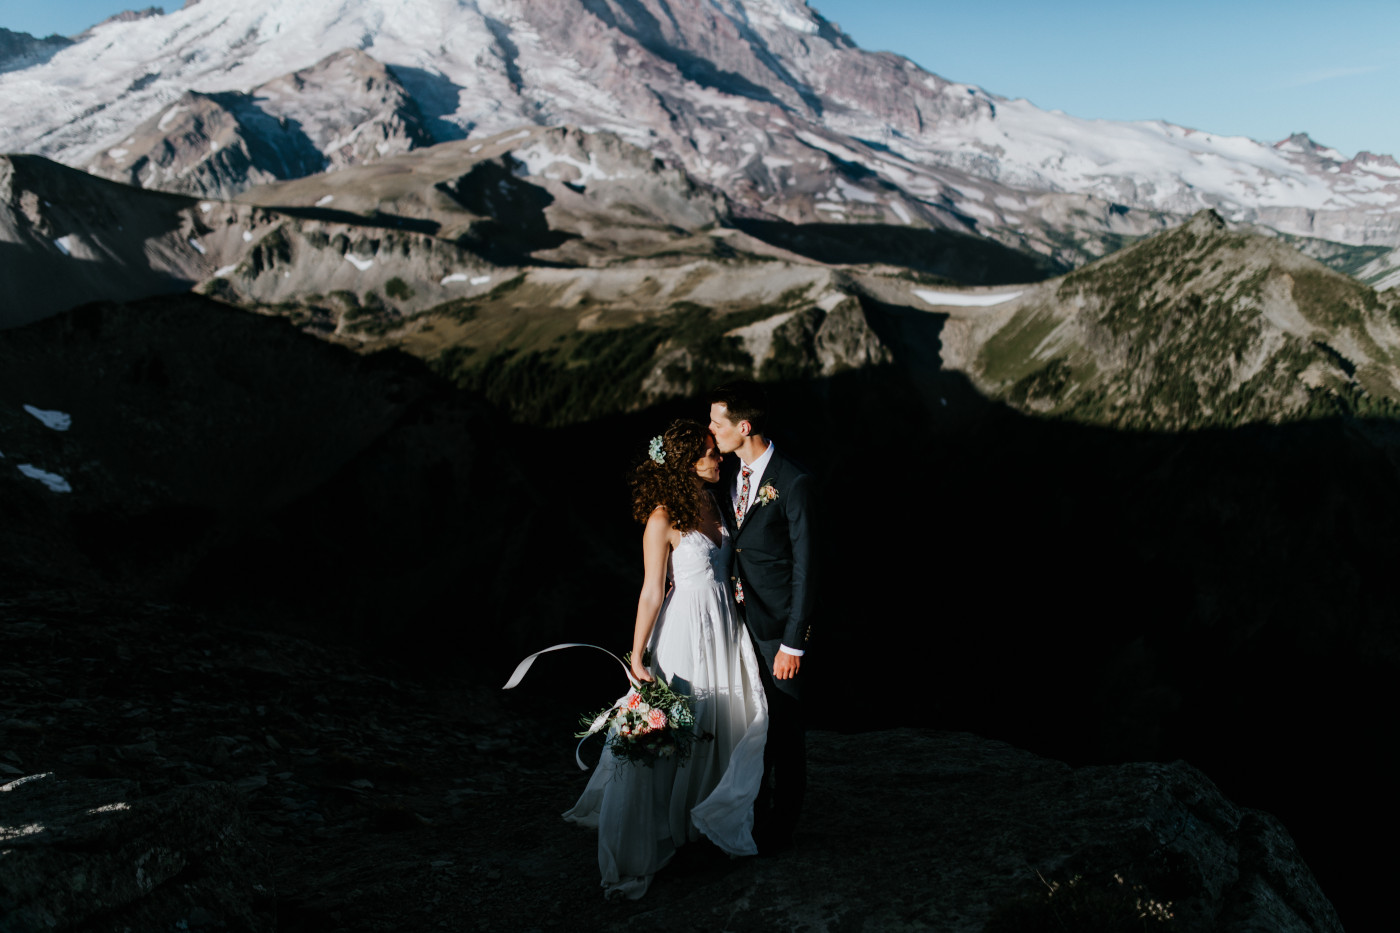 Tasha and Chad stand at their elopement place. Elopement photography at Mount Rainier by Sienna Plus Josh.